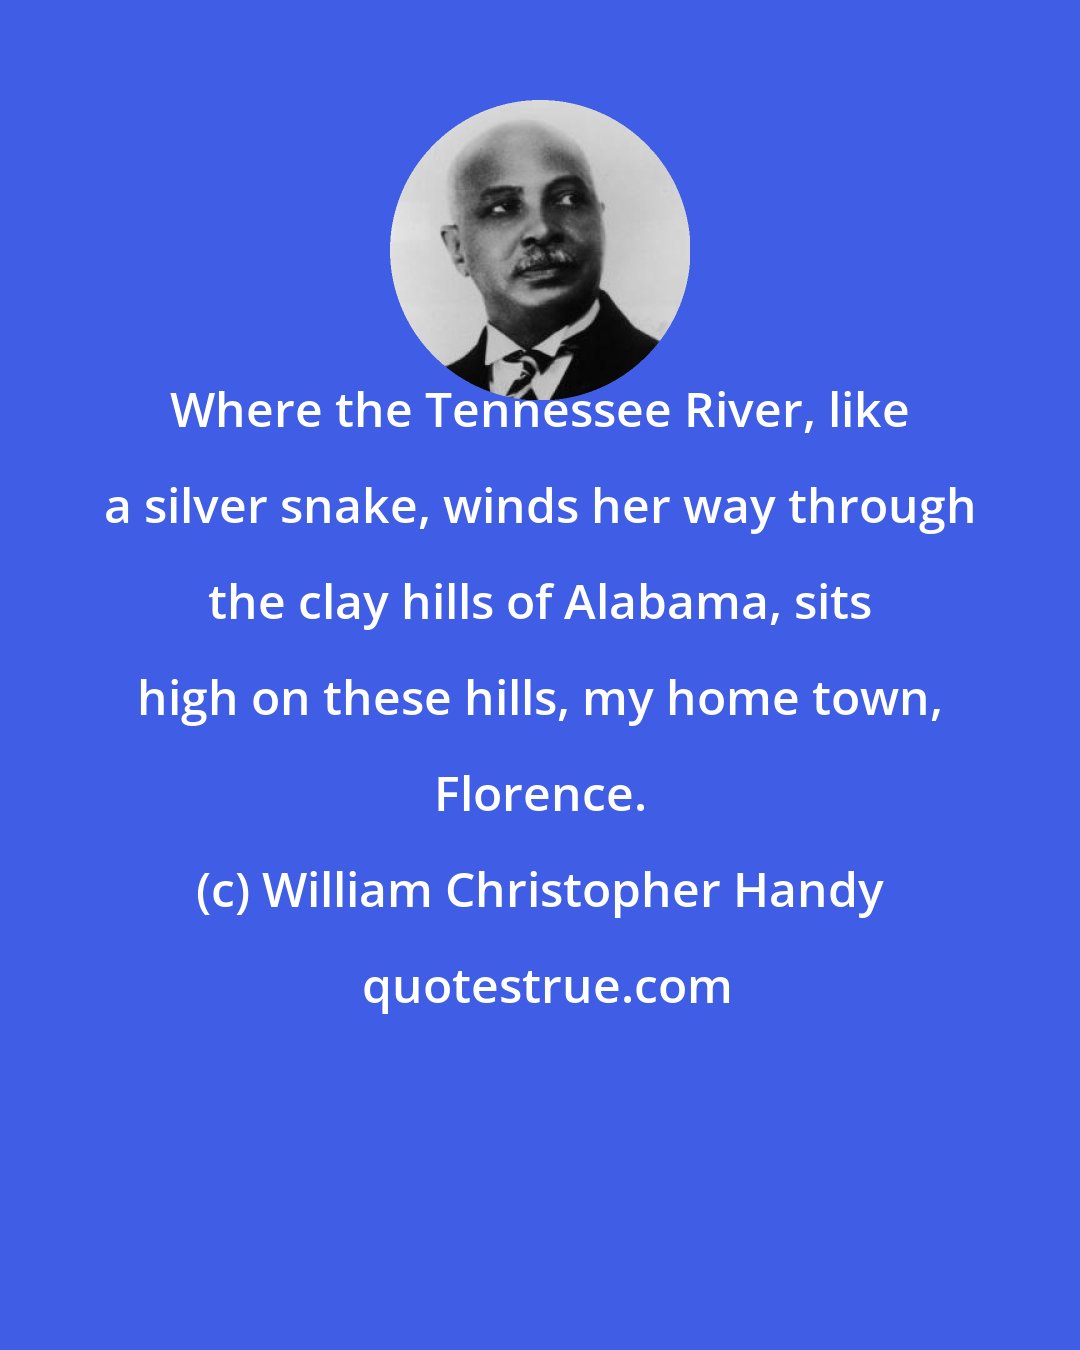 William Christopher Handy: Where the Tennessee River, like a silver snake, winds her way through the clay hills of Alabama, sits high on these hills, my home town, Florence.